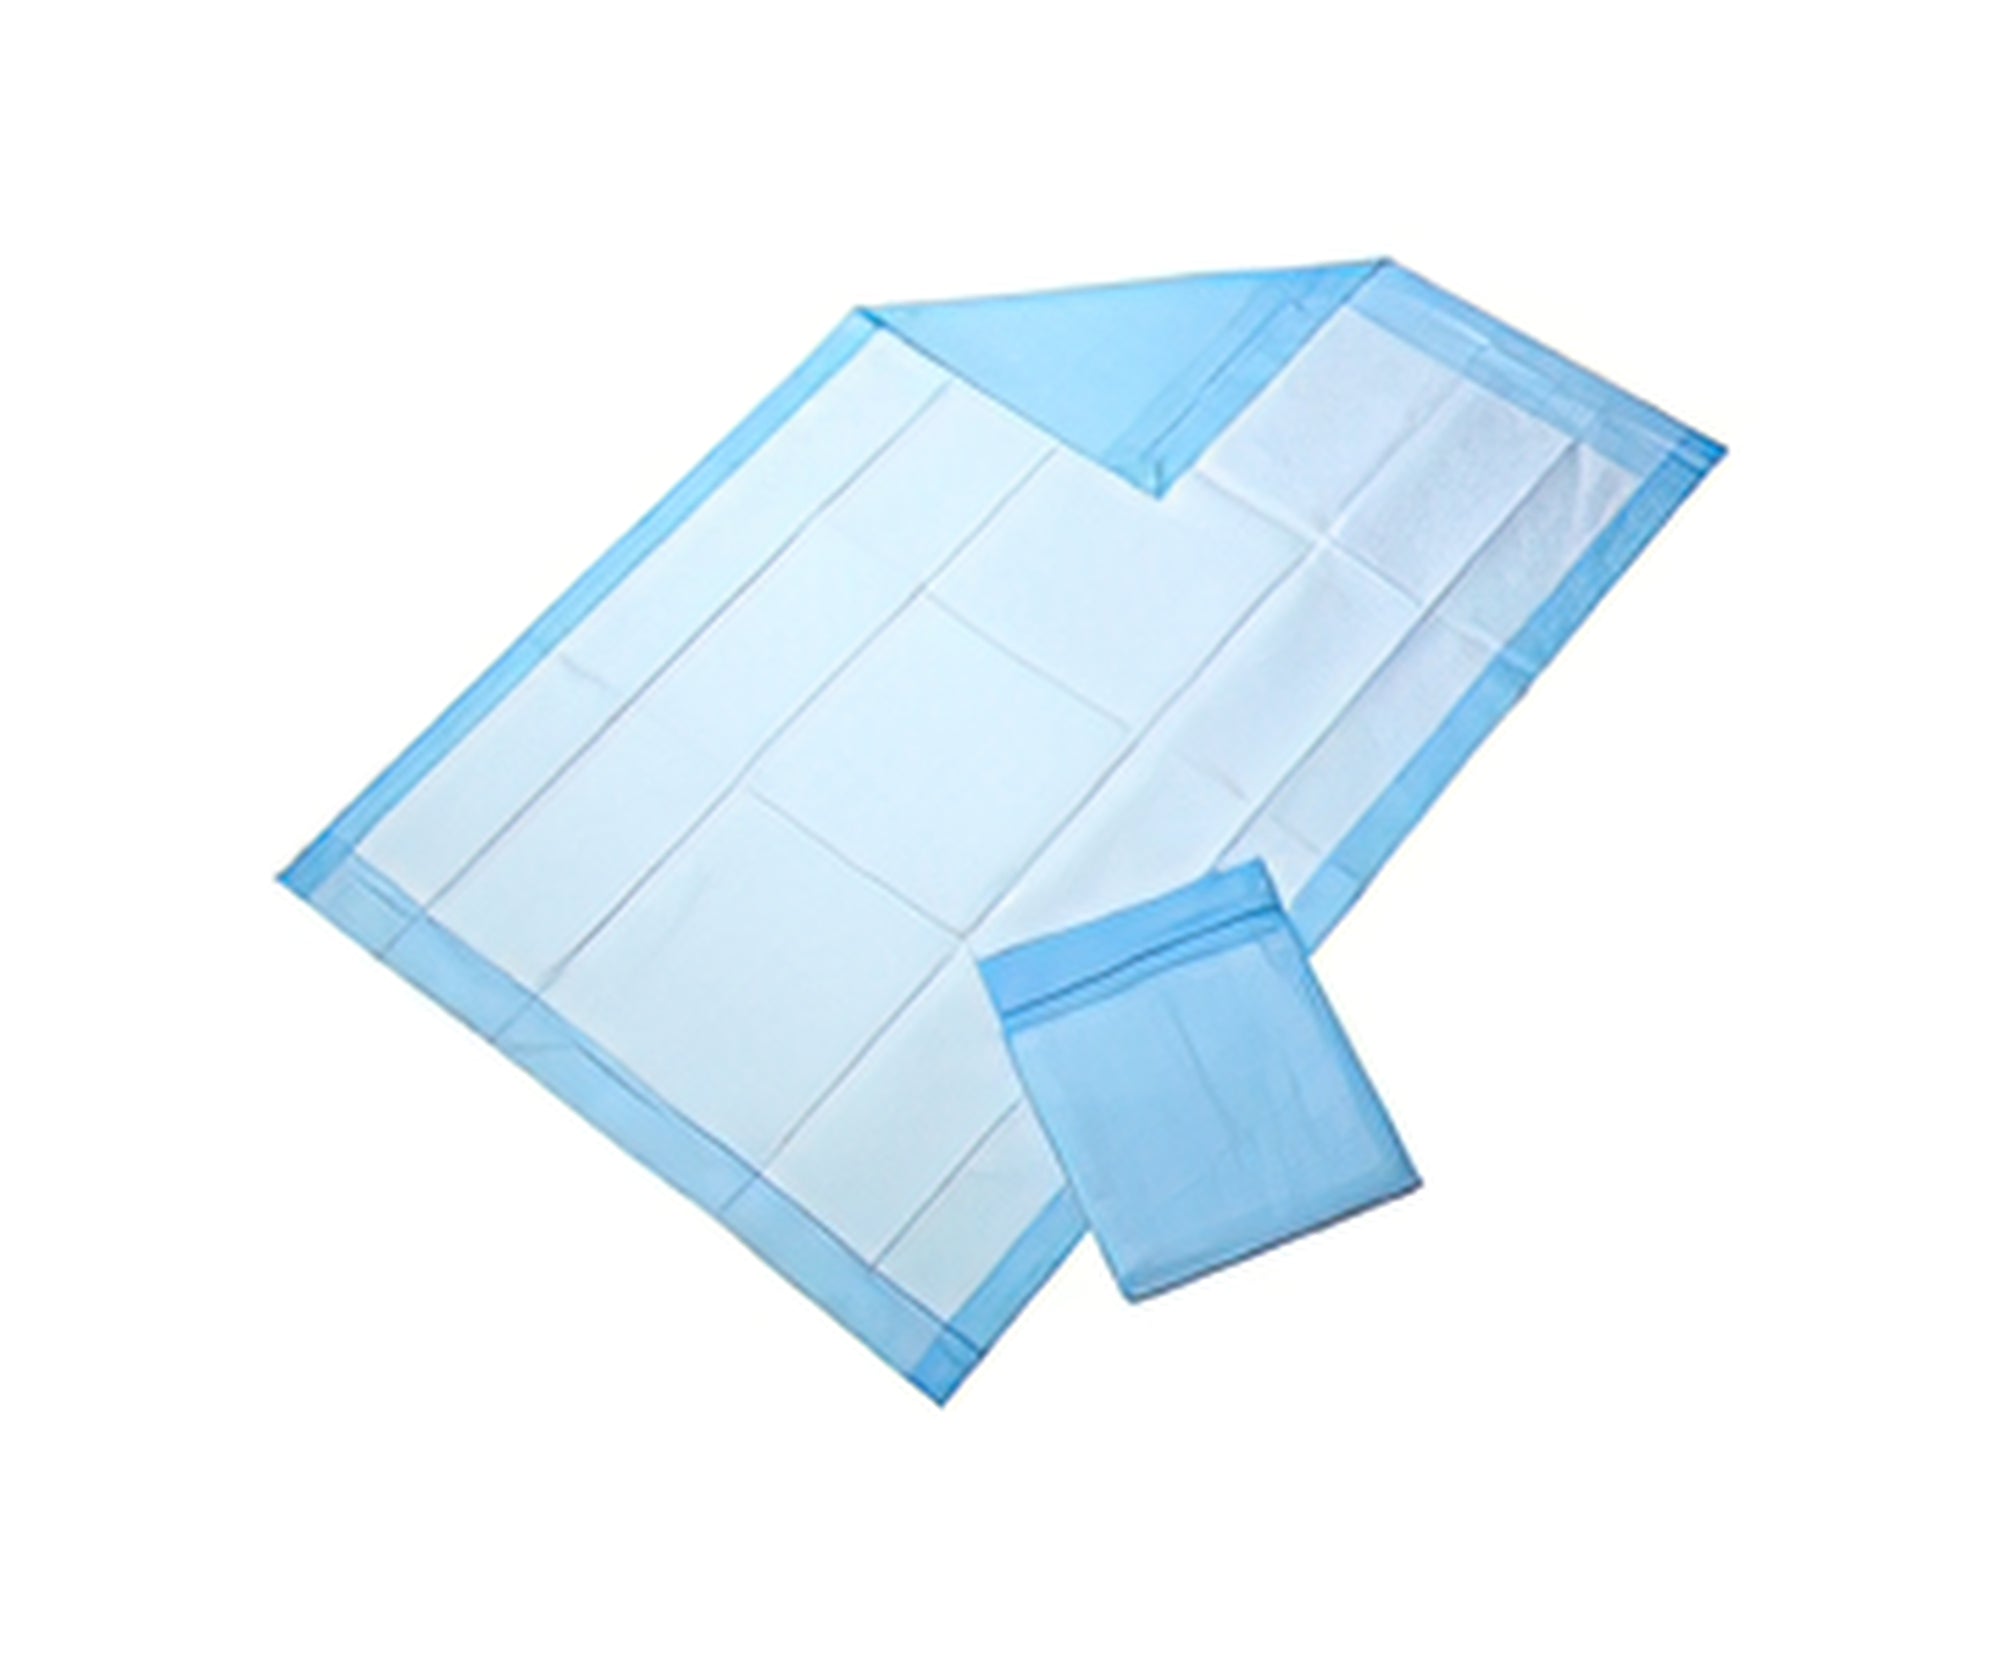 Factory Incontinence Underpads, China disposable underpad